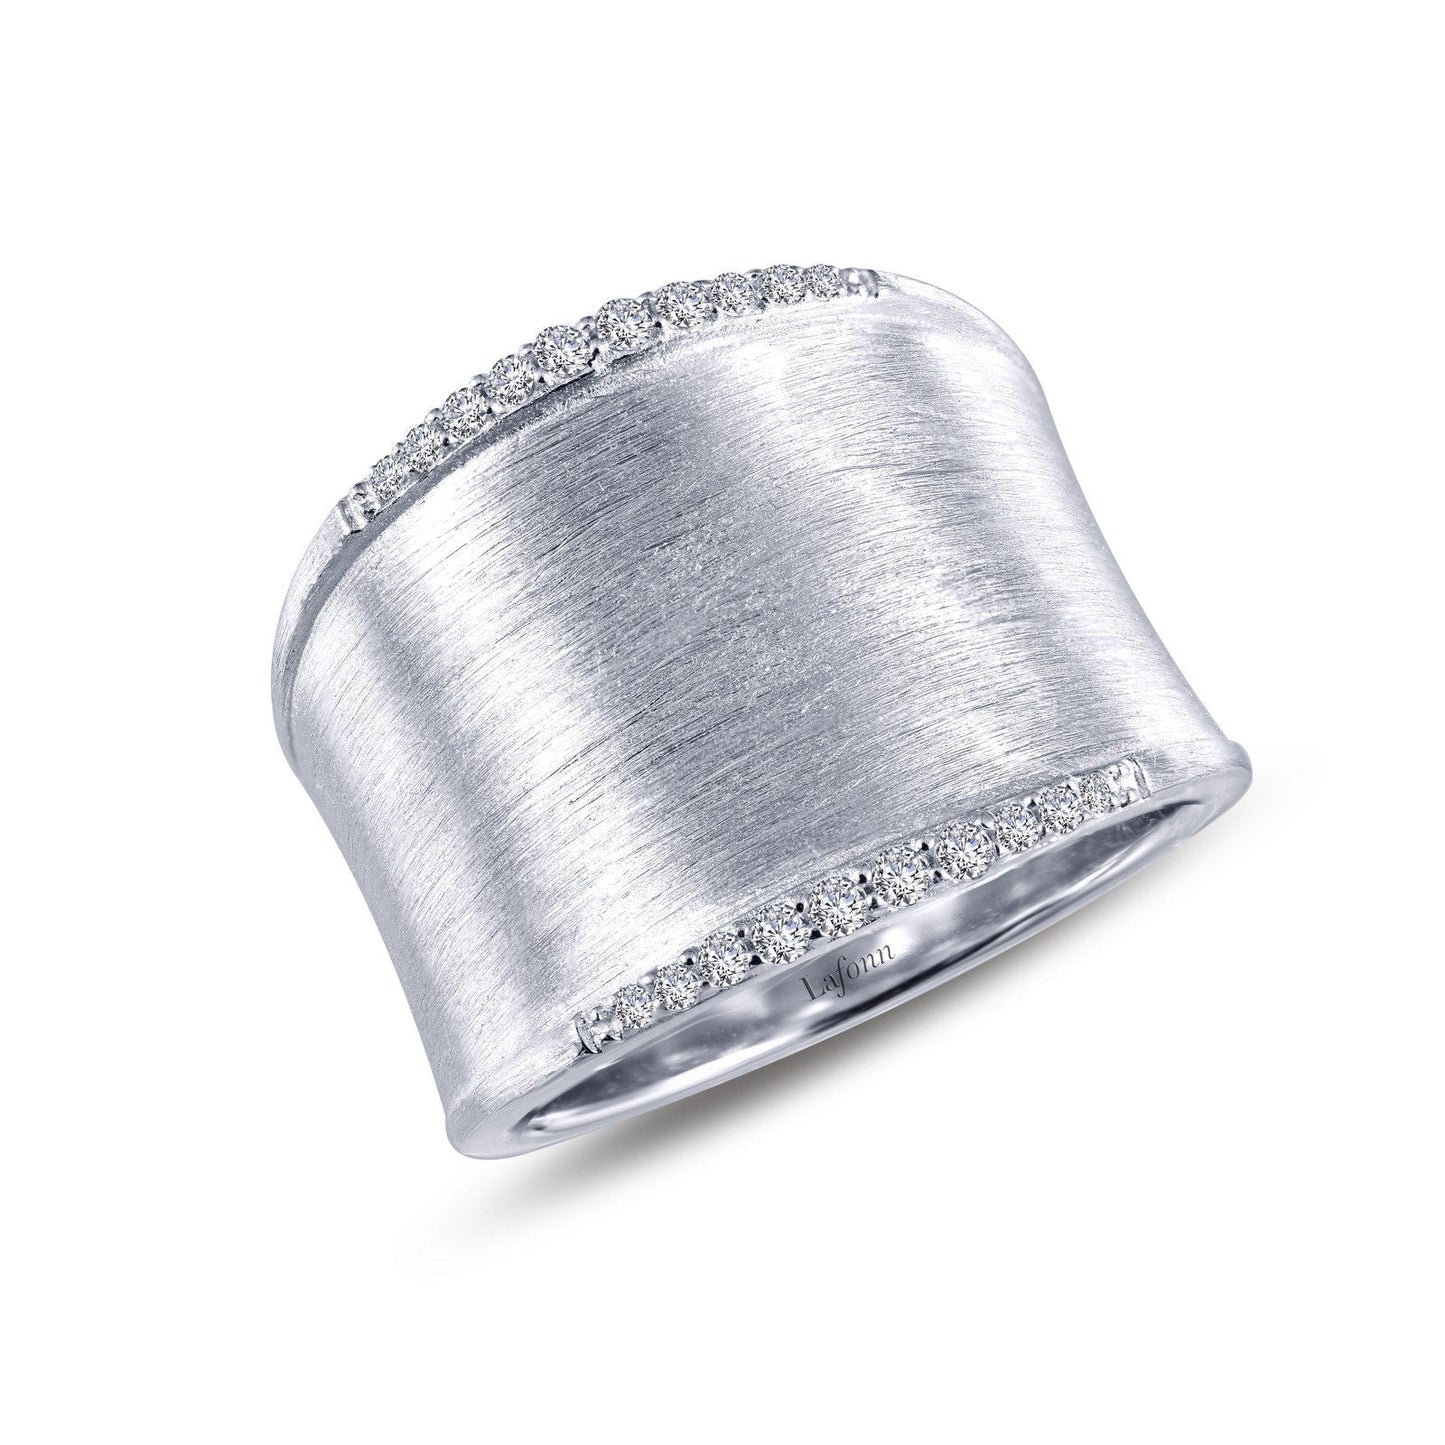 Load image into Gallery viewer, Lafonn Sleek Wide Band Cuff Ring Simulated Diamond RINGS Size 6 Platinum 0.2 CTS Approx 16.2mm (W)
